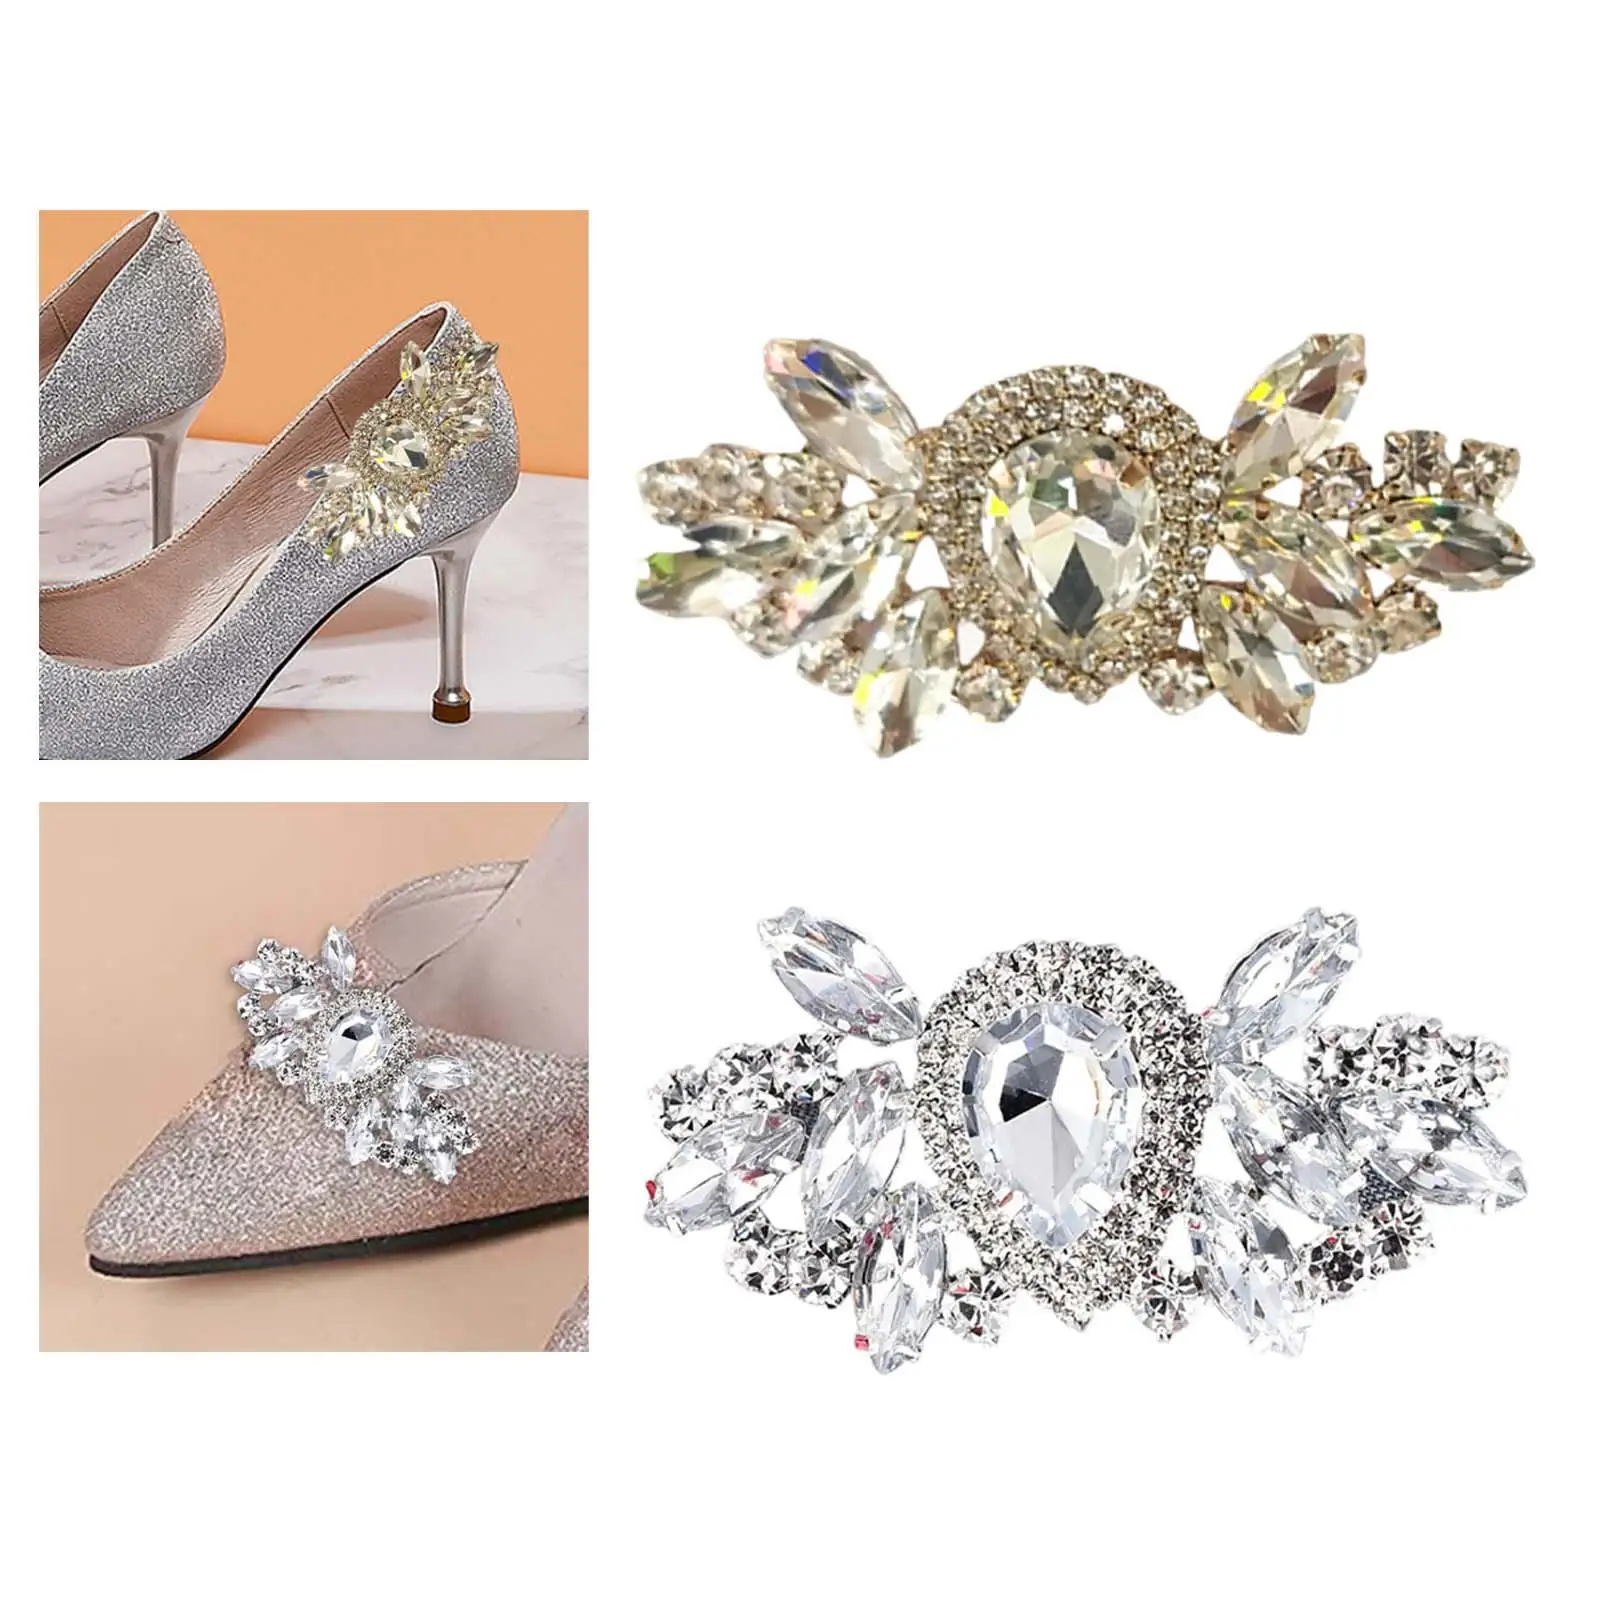 Fashion Shoes Charm Crafting Decoration Jewelry Making DIY Banquet Clamps Embellishments Shoes Buckle for Wedding Bridesmaids